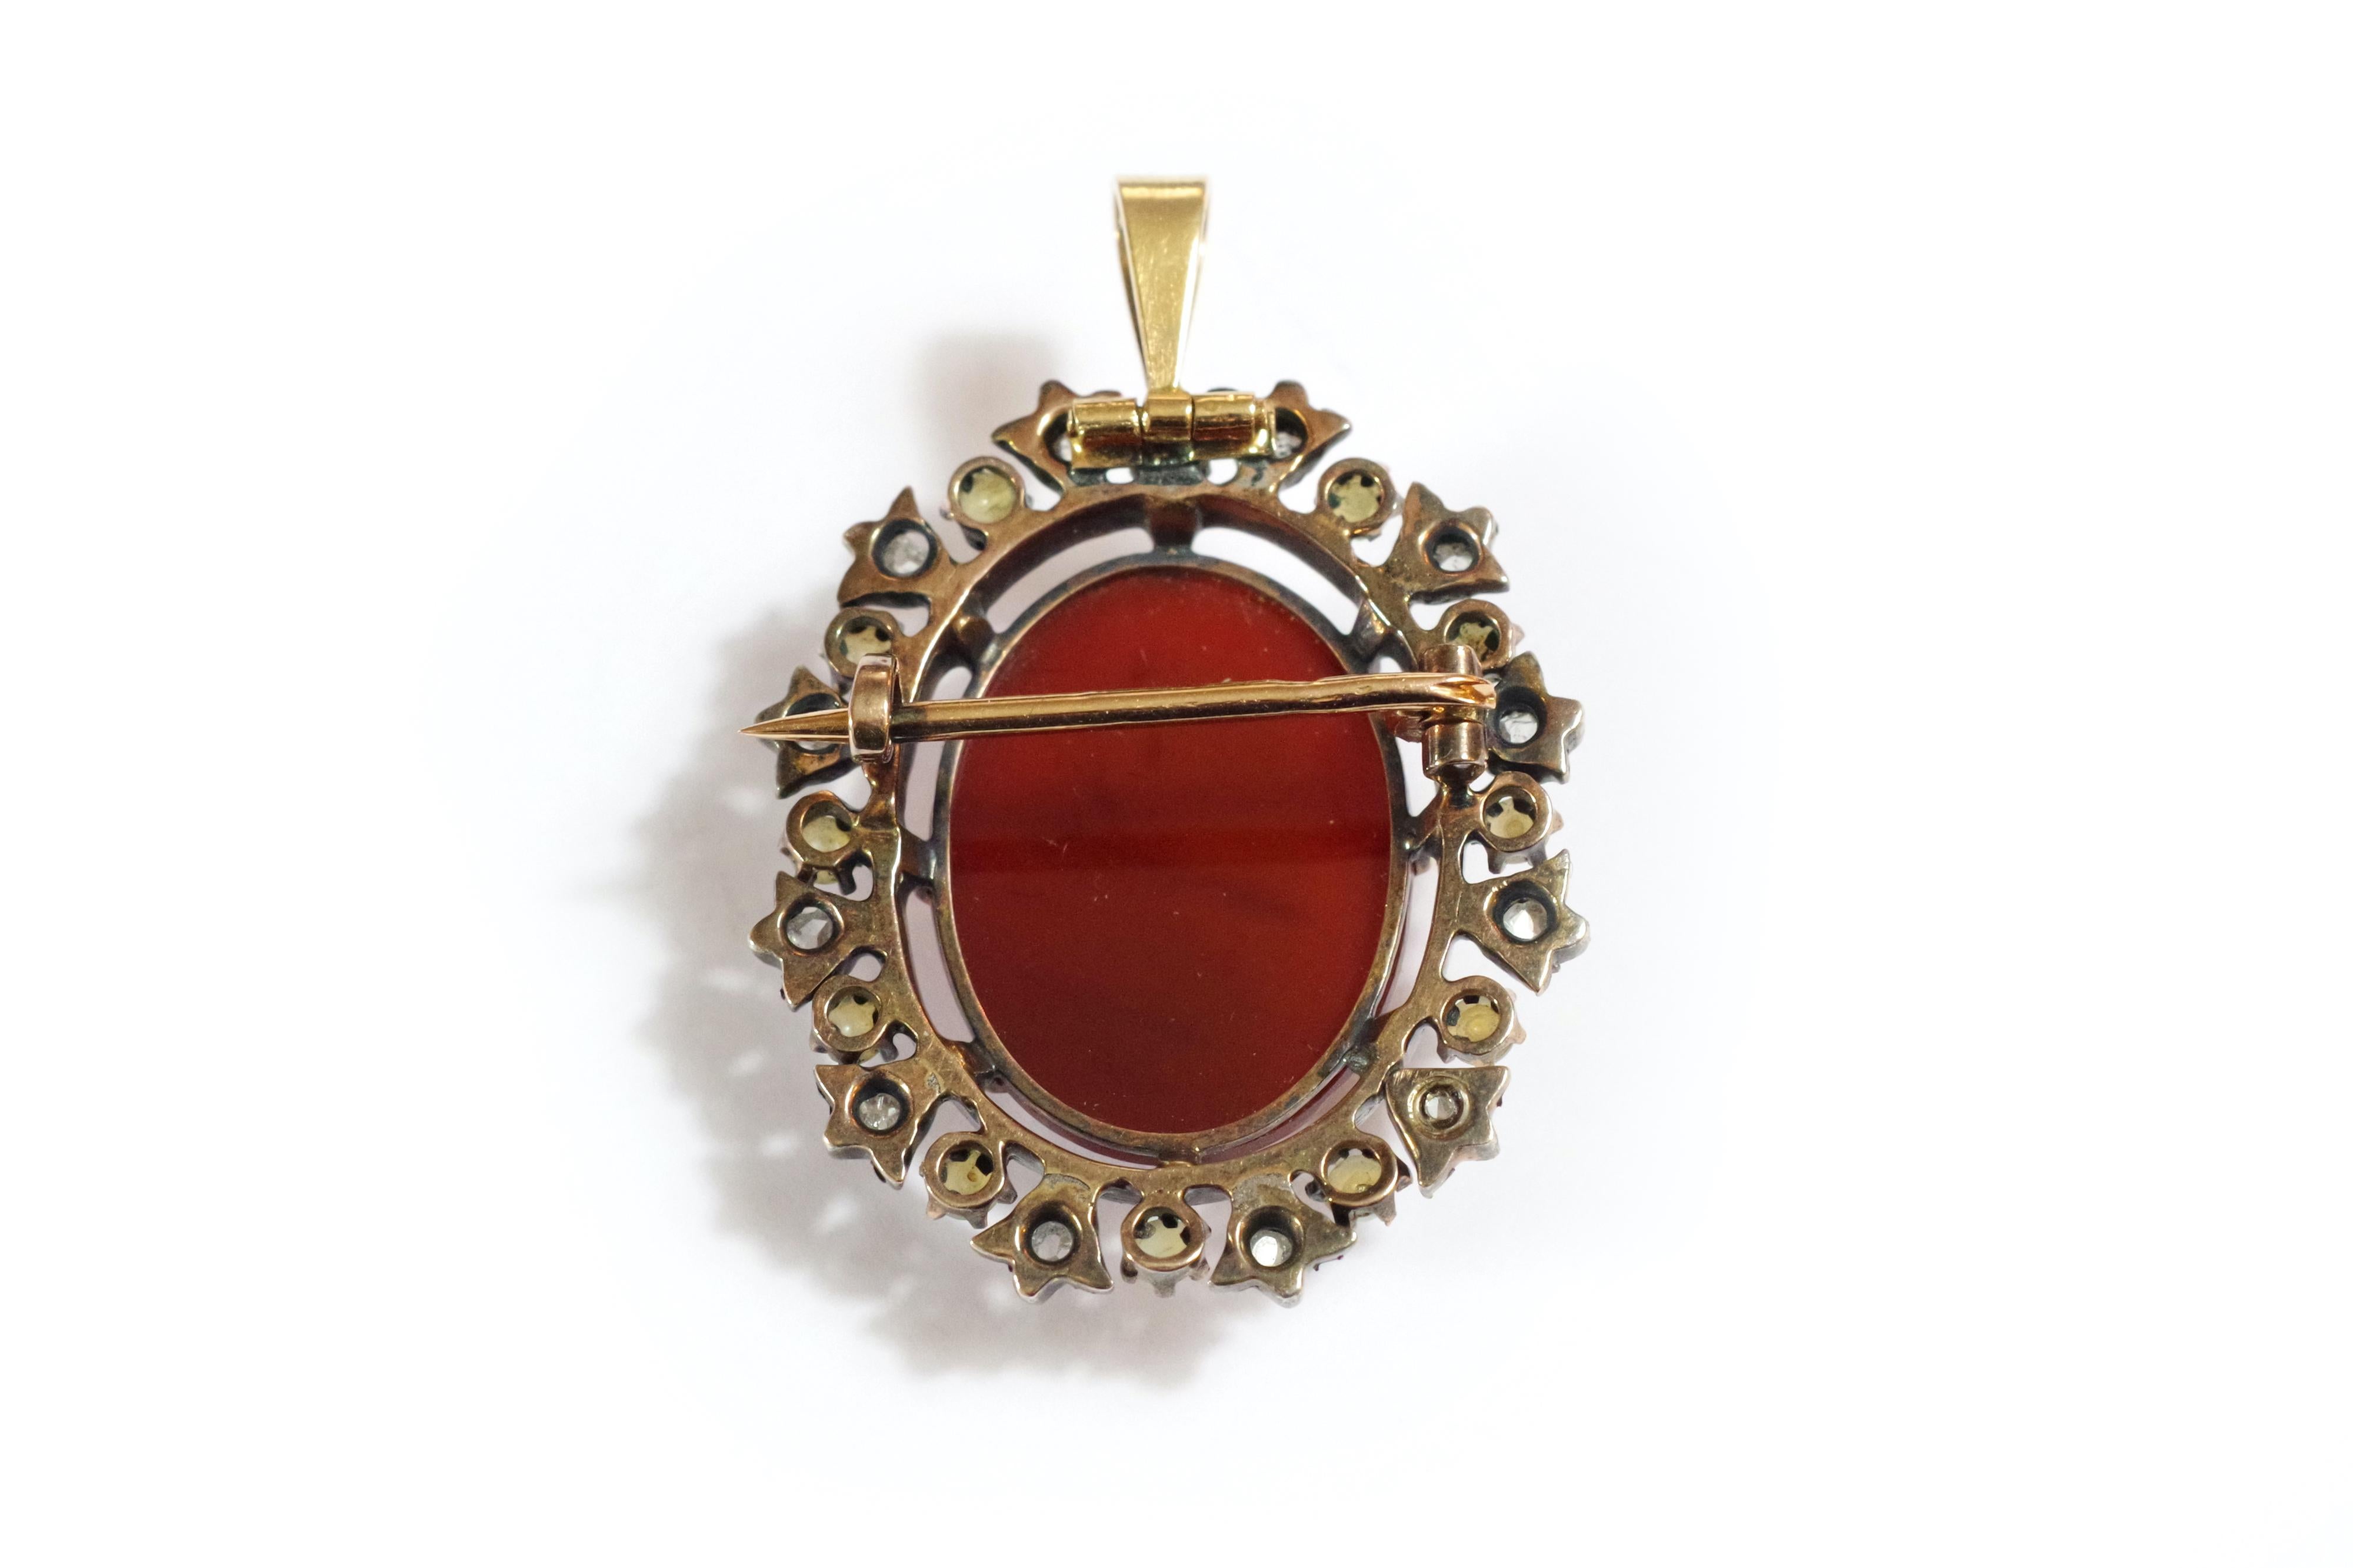 Rose Cut Victorian Cameo Agate Brooch Pendant in 18k Gold and Silver